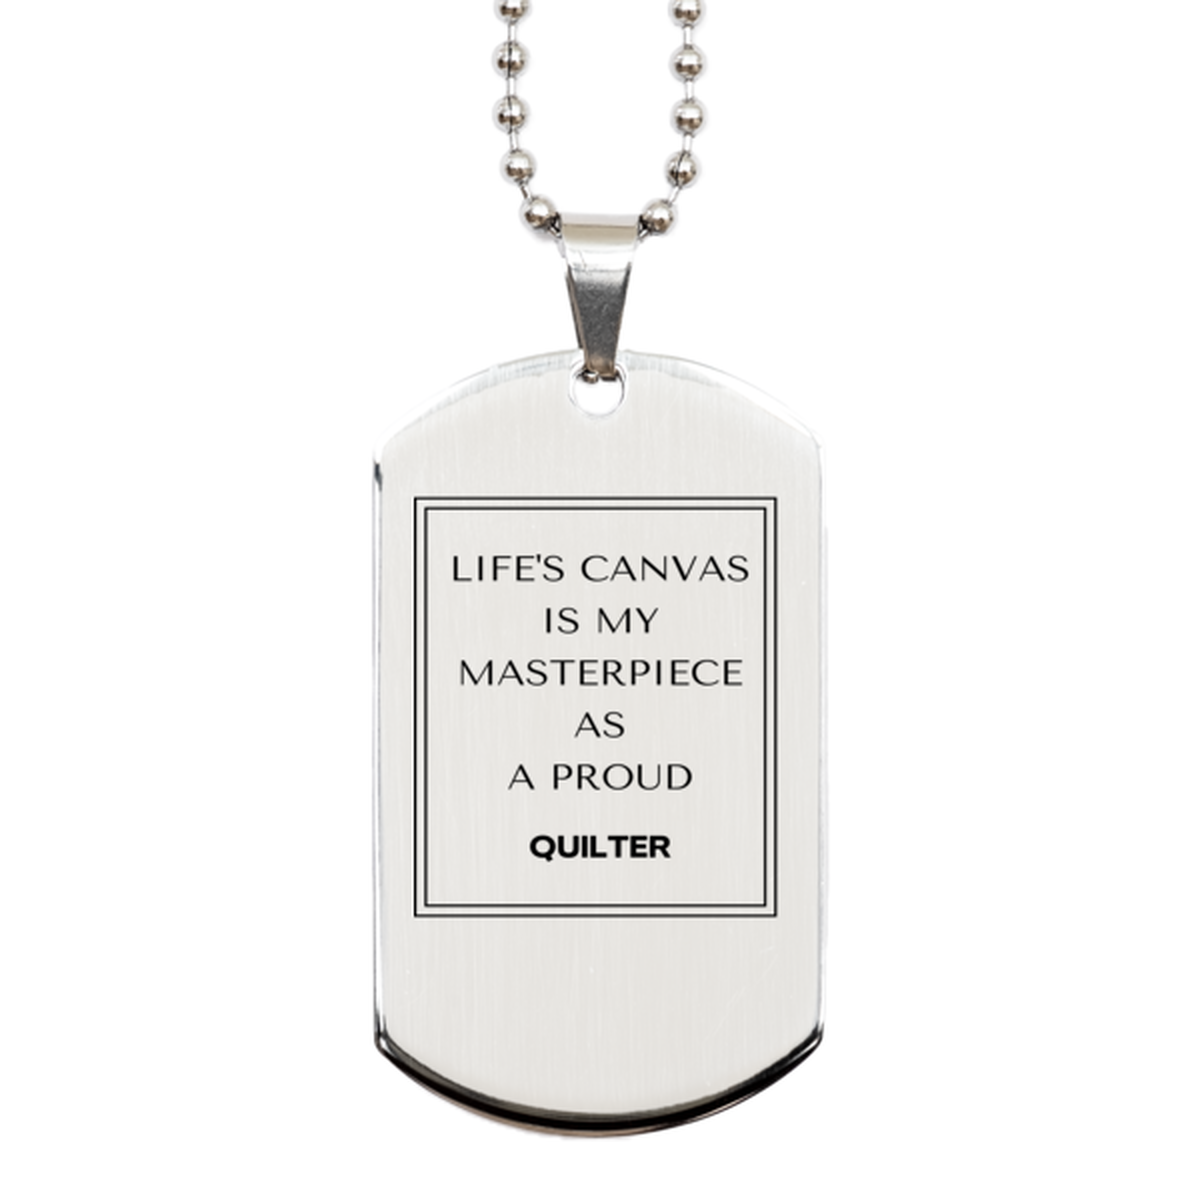 Proud Quilter Gifts, Life's canvas is my masterpiece, Epic Birthday Christmas Unique Silver Dog Tag For Quilter, Coworkers, Men, Women, Friends